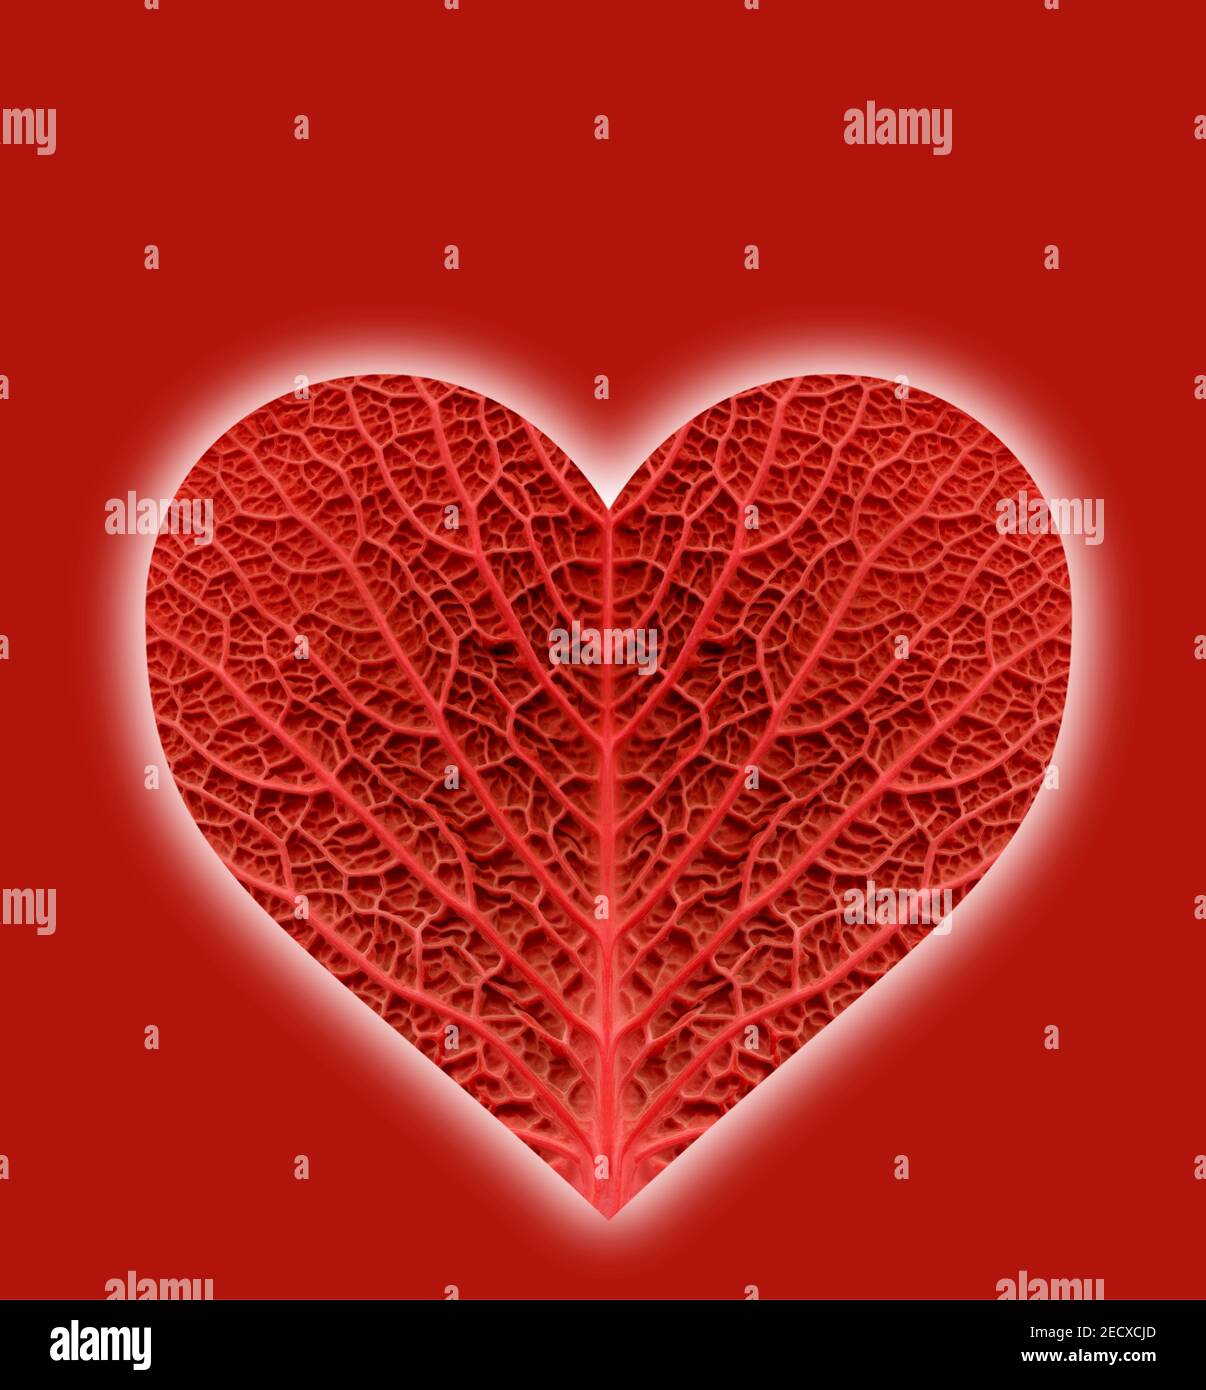 A stylised heart graphic produced from the texture and pattern of a cabbage leaf Stock Photo